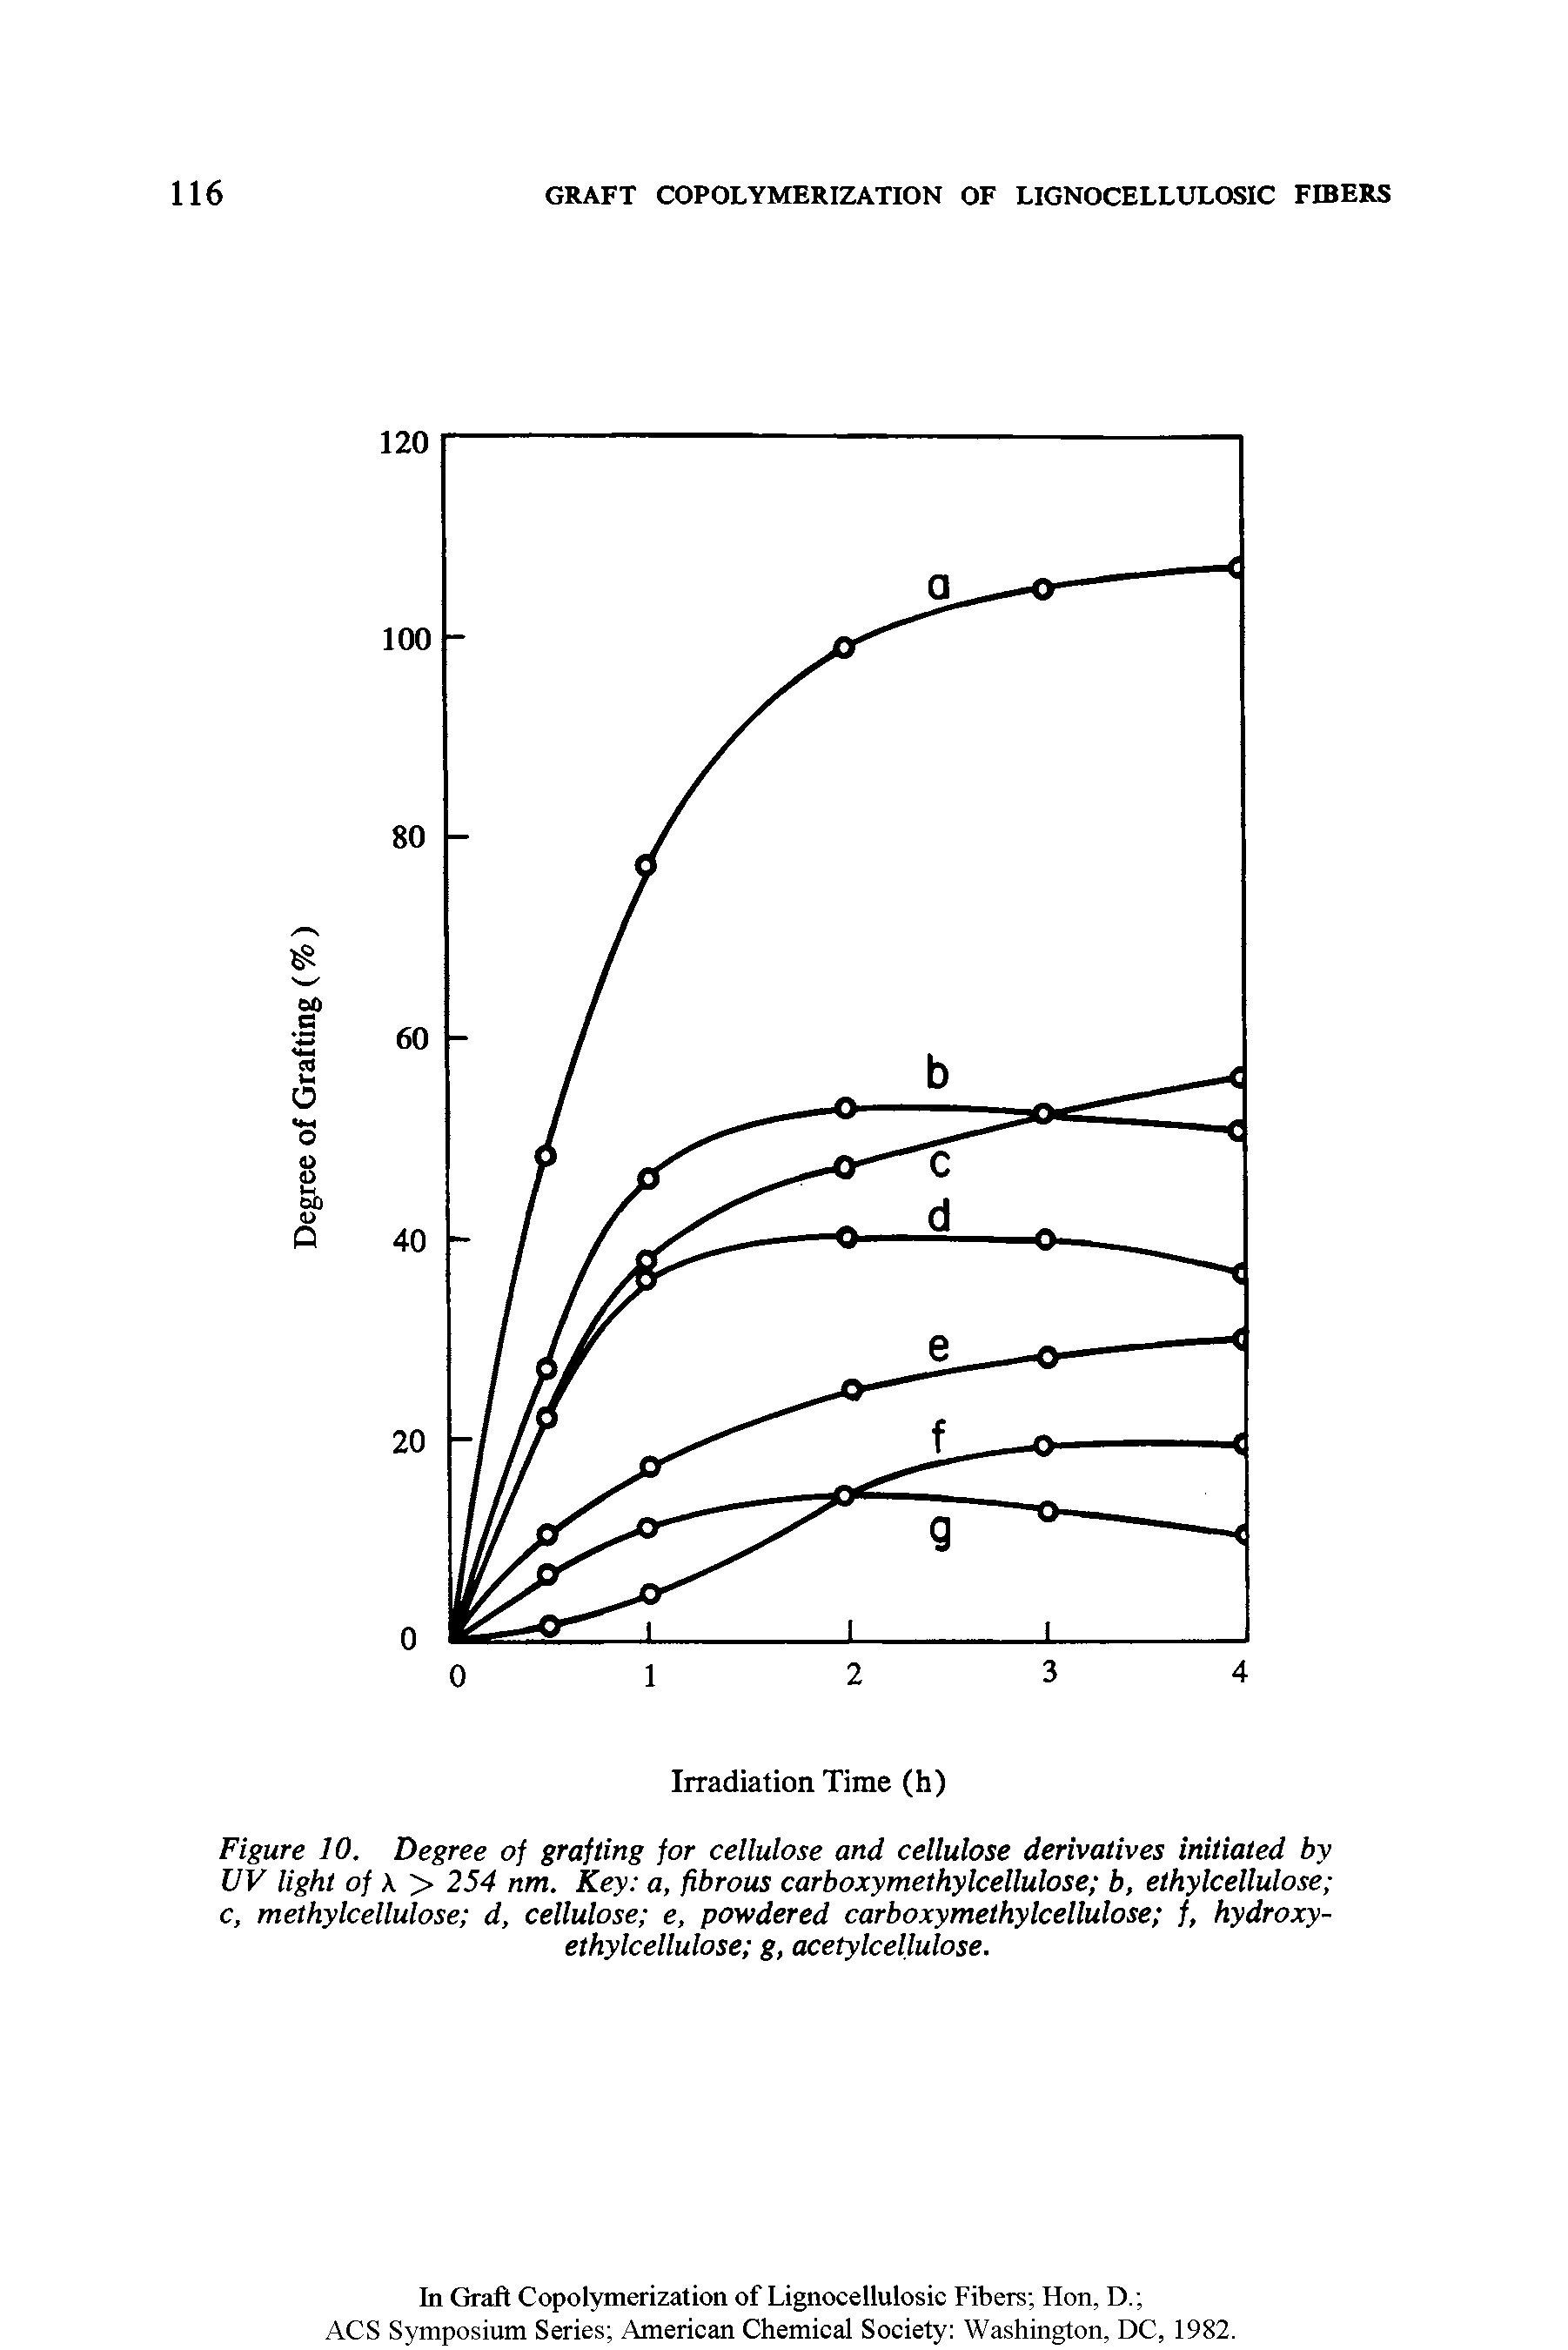 Figure 10. Degree of grafting for cellulose and cellulose derivatives initiated by UV light of > 254 nm. Key a, fibrous carboxymethylcellulose b, ethylcellulose c, methylcellulose d, cellulose e, powdered carboxymethylcellulose f, hydroxy-ethylcellulose g, acetylcellulose.